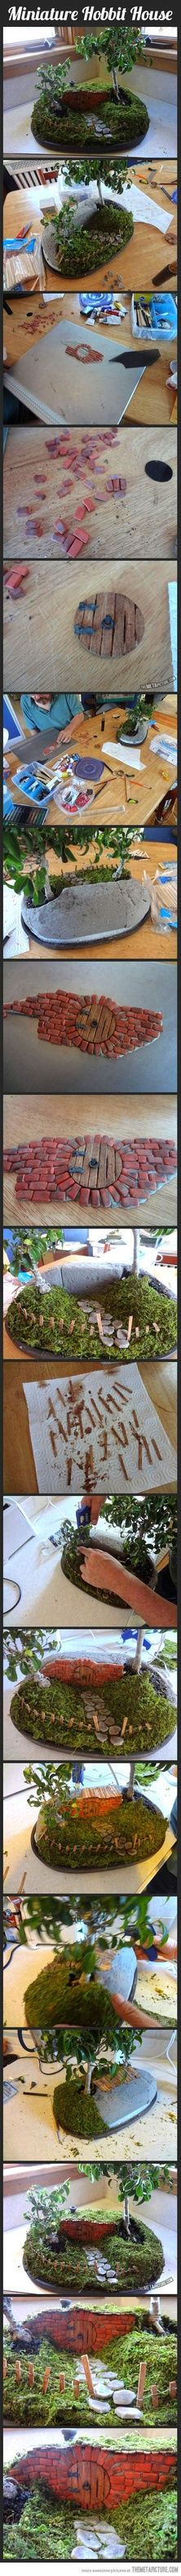 10 Great Decorate With Miniature For Cute Gardens 13